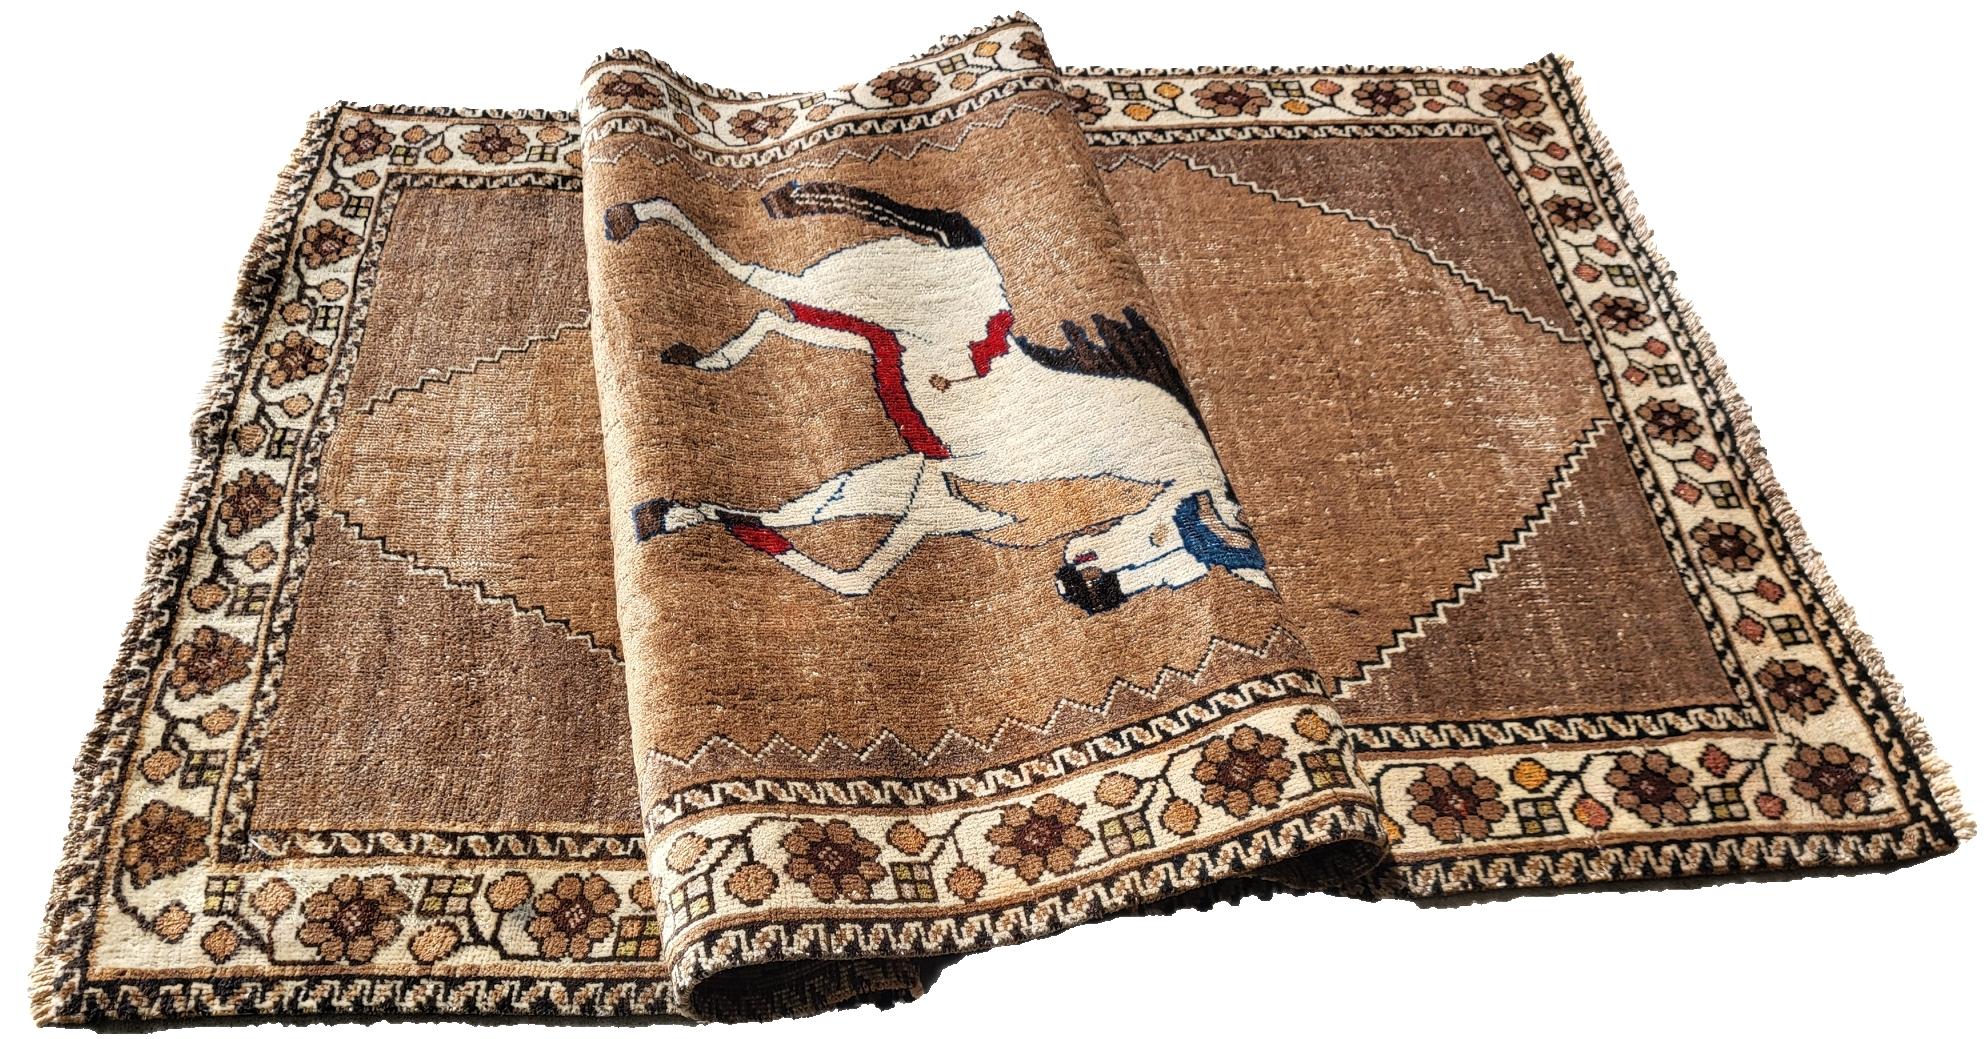 Unique 100 + Year Old Kashkooli Gabbeh

8ft x 3.5ft

Enchanting old pictorial Gabbeh rug, handcrafted by masterful Kashkoolis of the Qashqais. This nomadic treasure features an unusual horse depictation unique to the Nomad who wove it.

Comprised